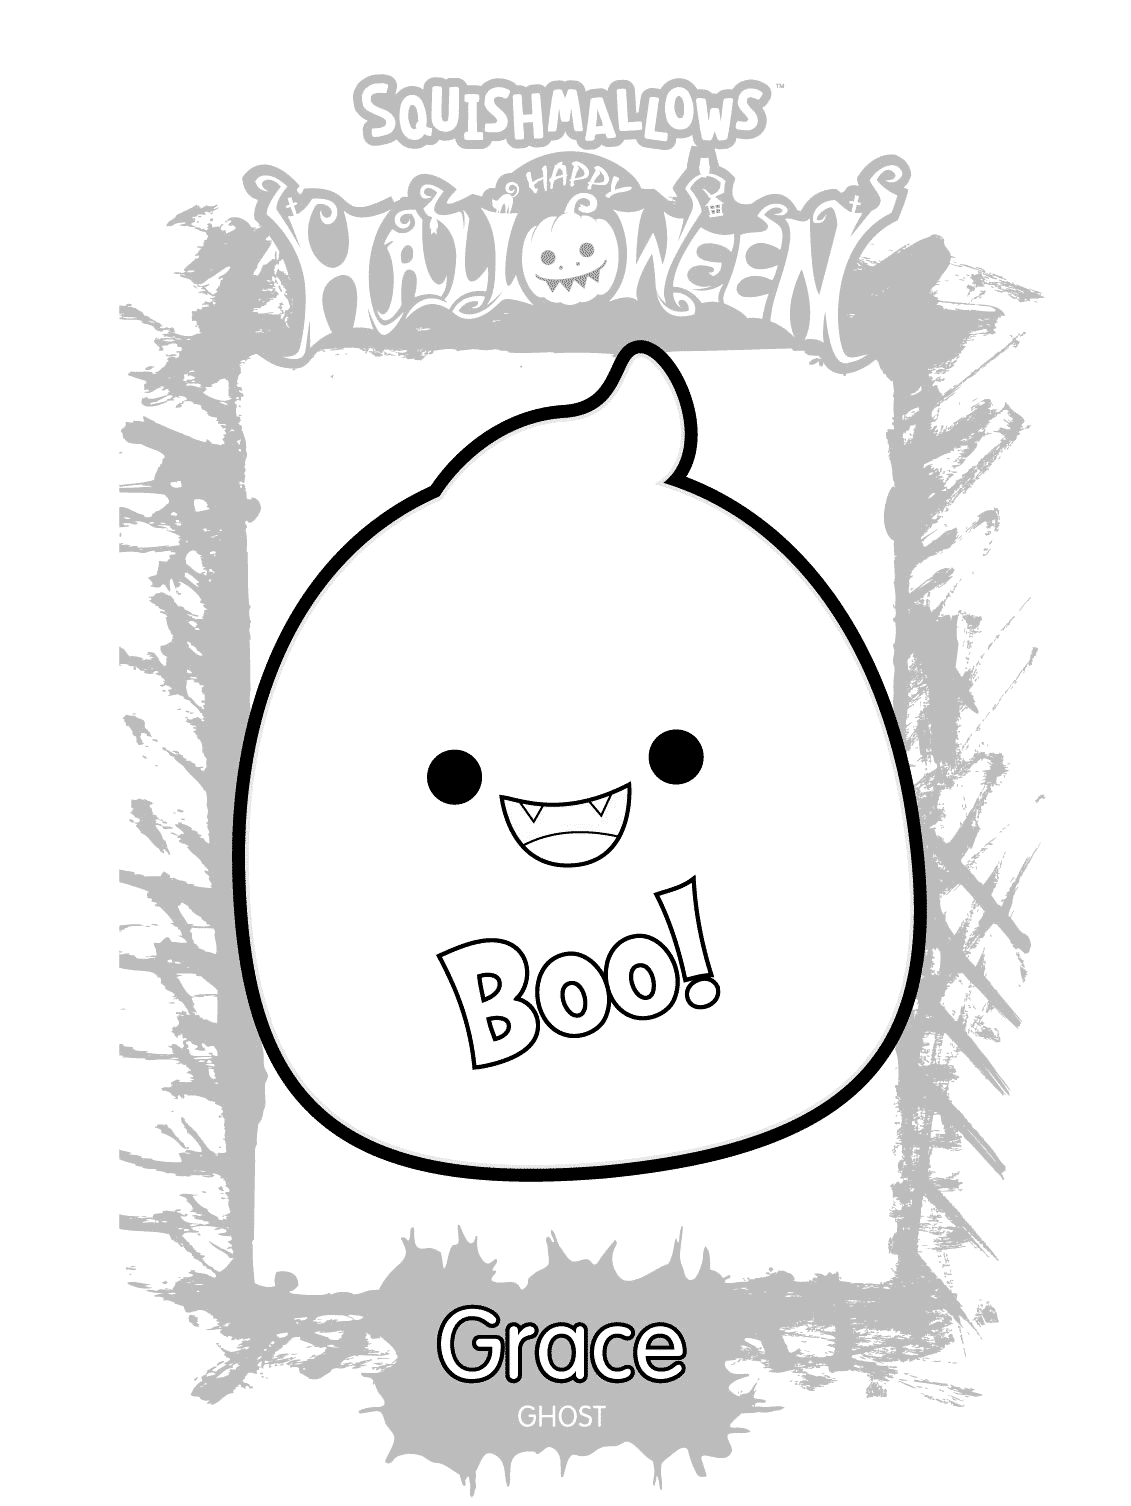 Halloween Squishmallows Ghost Grace Coloring Page